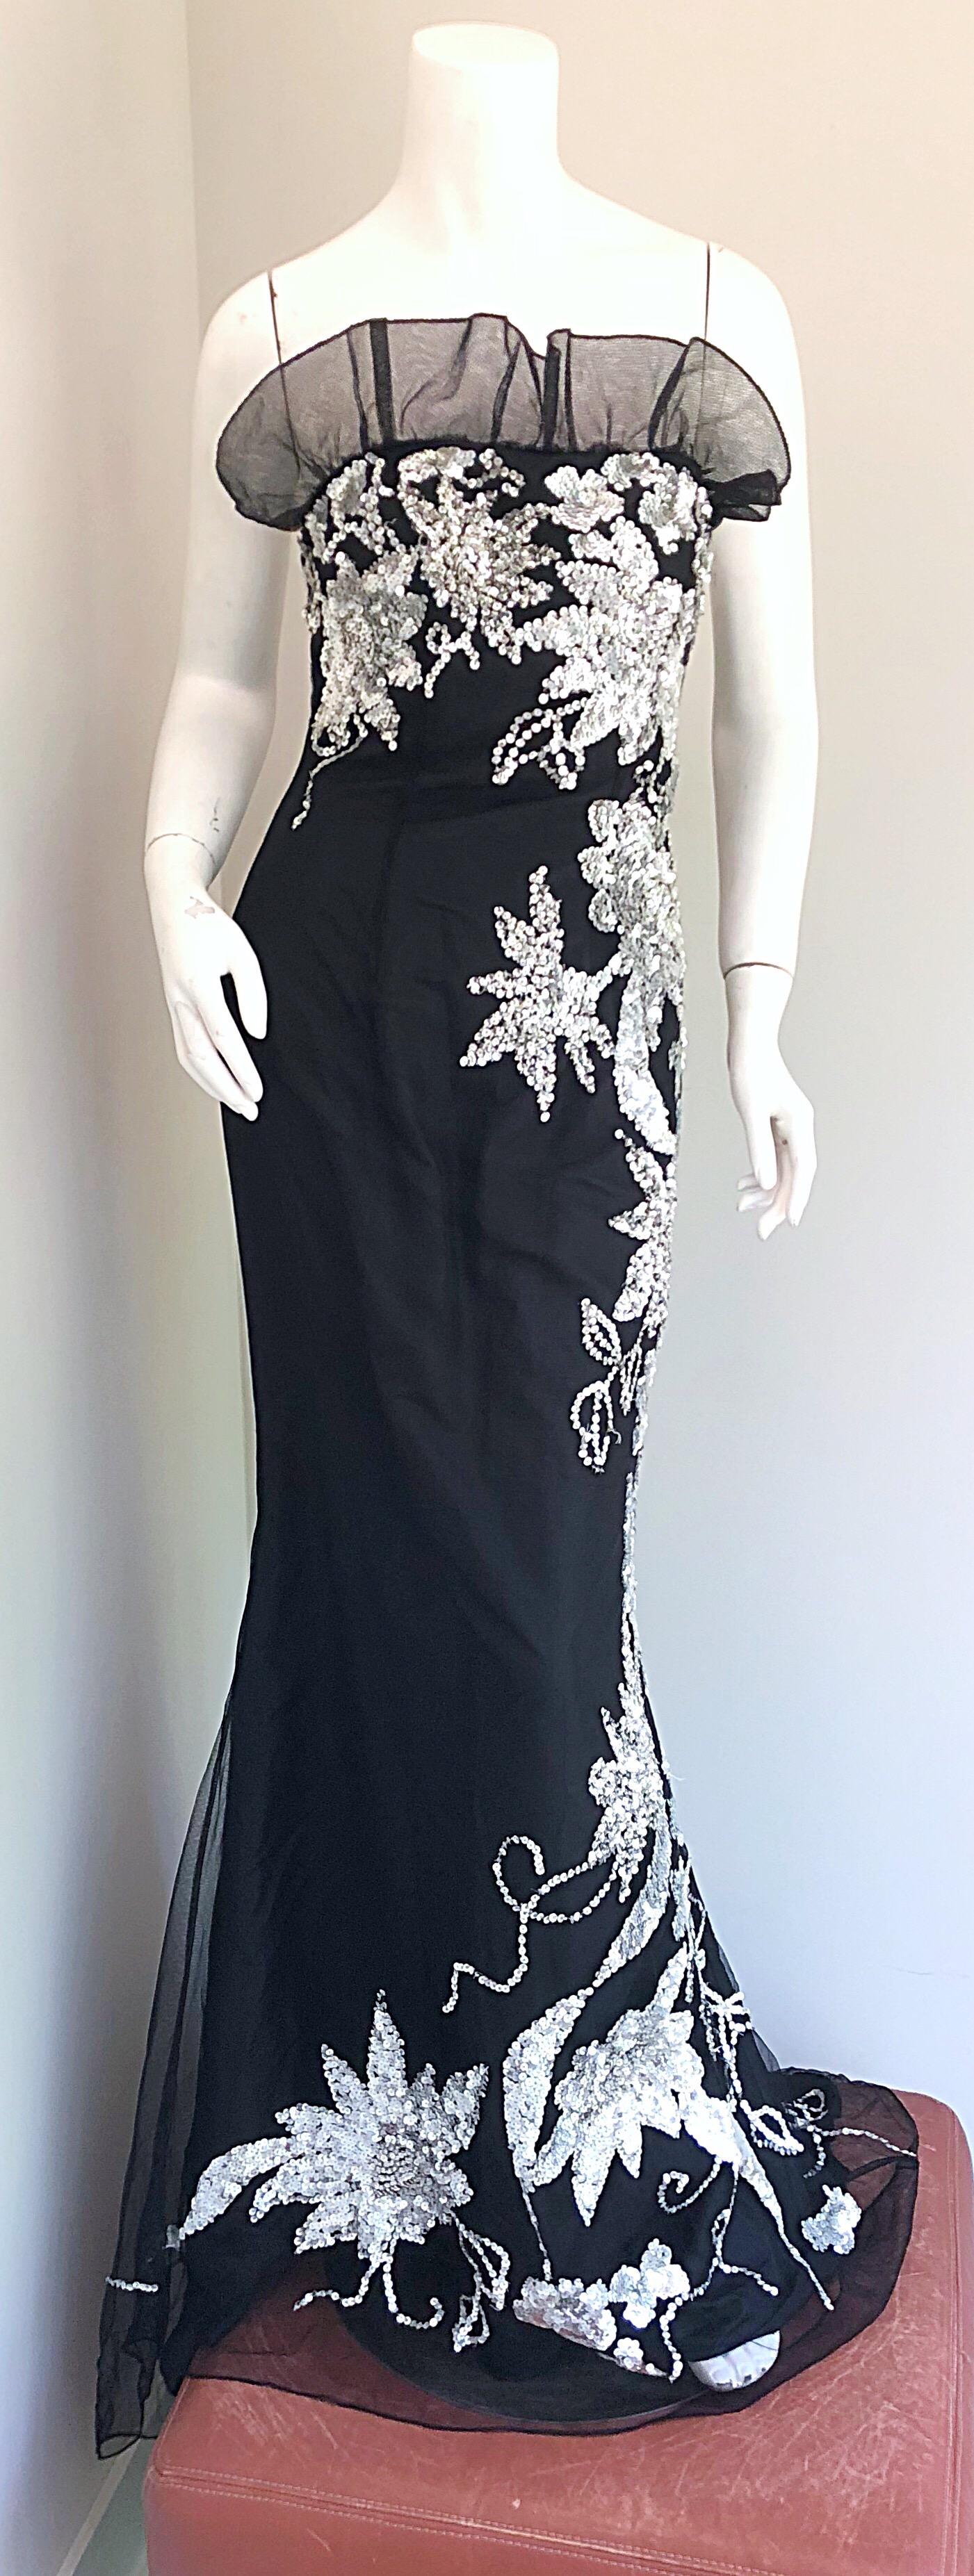 Gorgeous early 1990s black and silver tulle and sequined full length strapless evening dress! Features black taffeta with a tulle overlay. Thousands of hand-sewn silver sequins throughout. Ruffled neckline above the bust. Dramatic train in the back